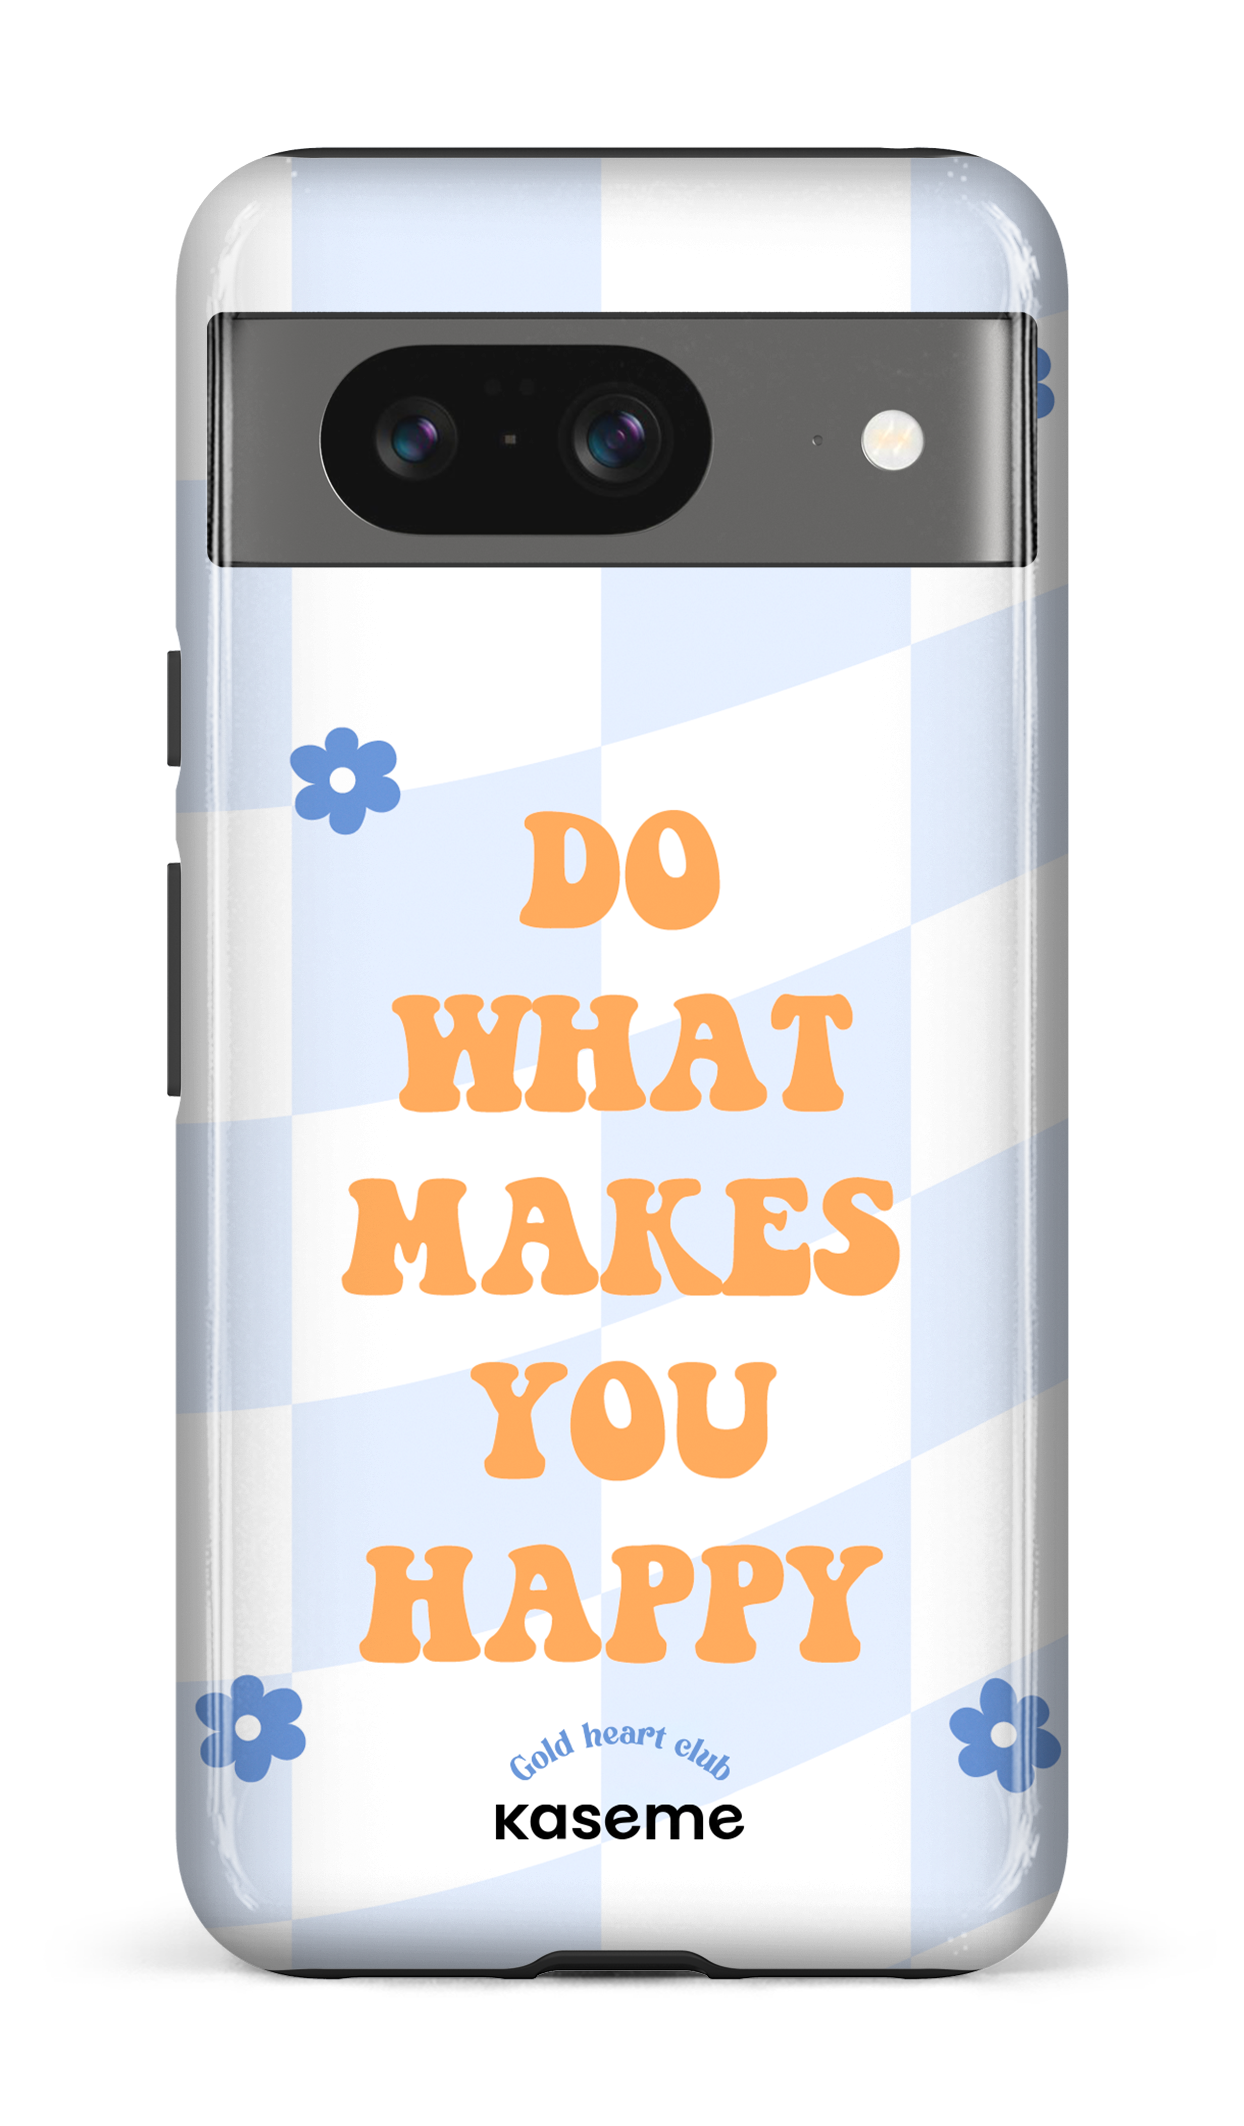 Do What Makes You Happy by Goldheartclub - Google Pixel 8